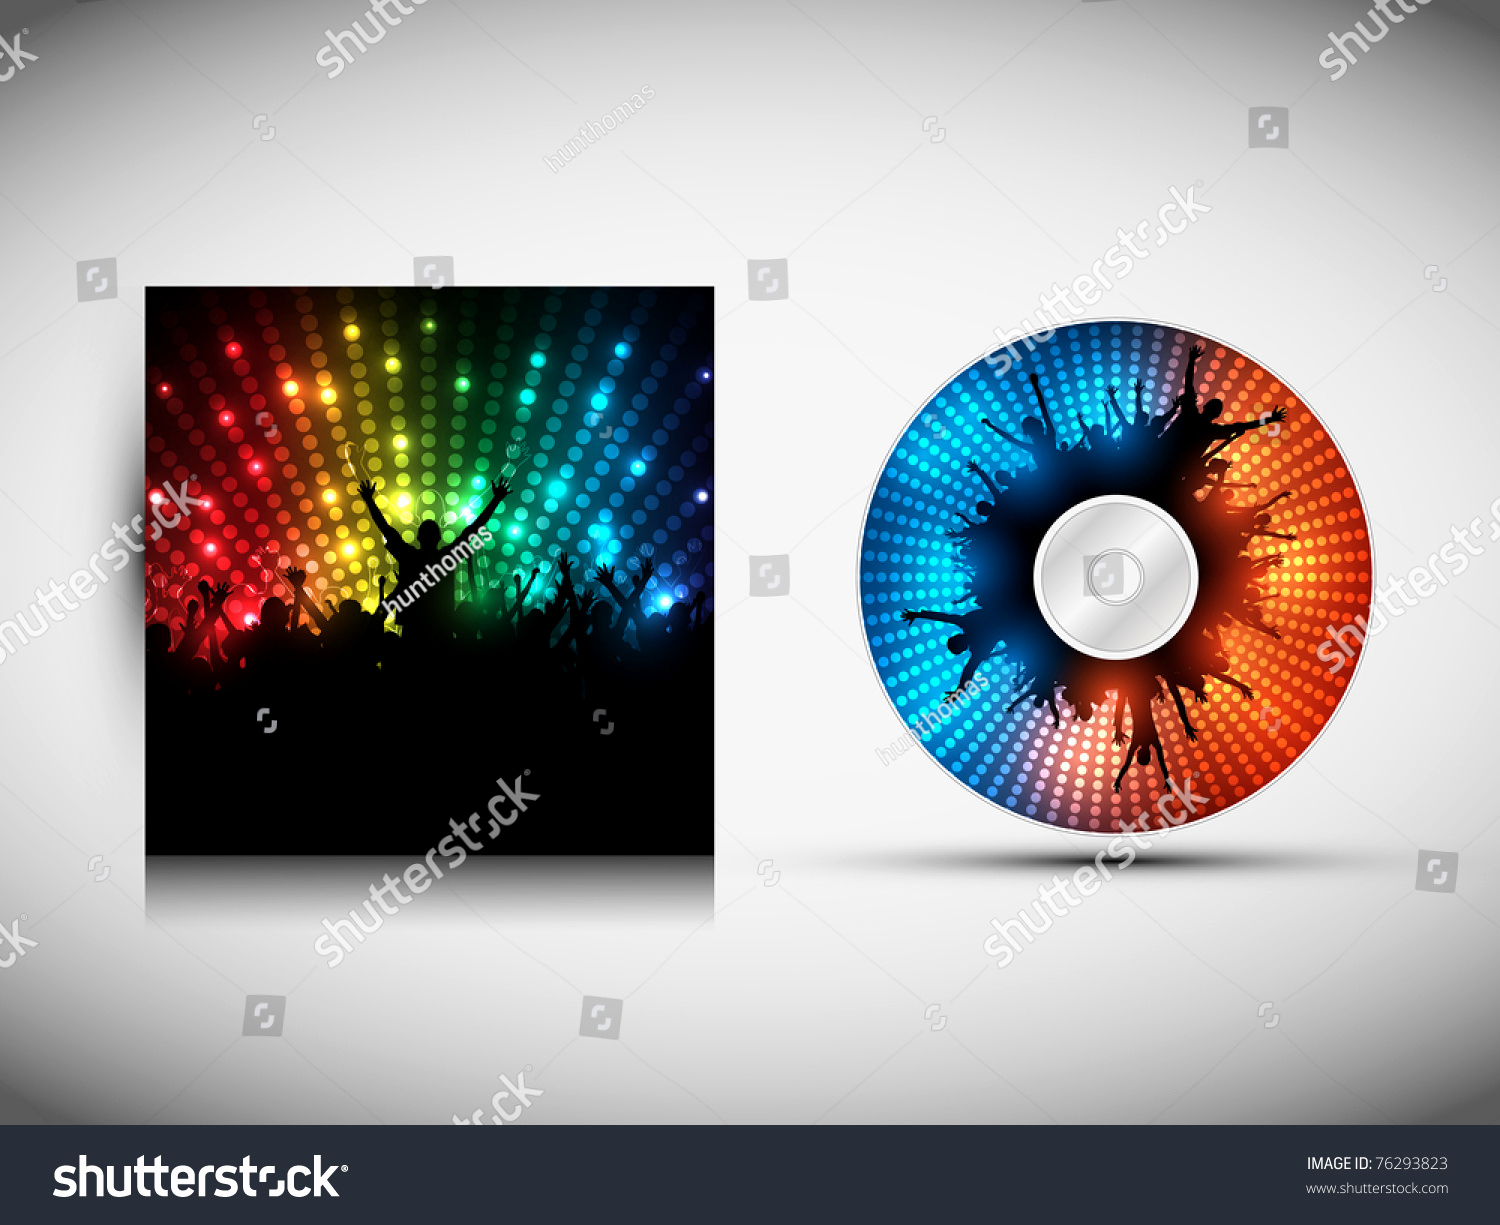 Cd Cover Design Template Lovely Cd Cover Design Template Party Vector Stock Vector